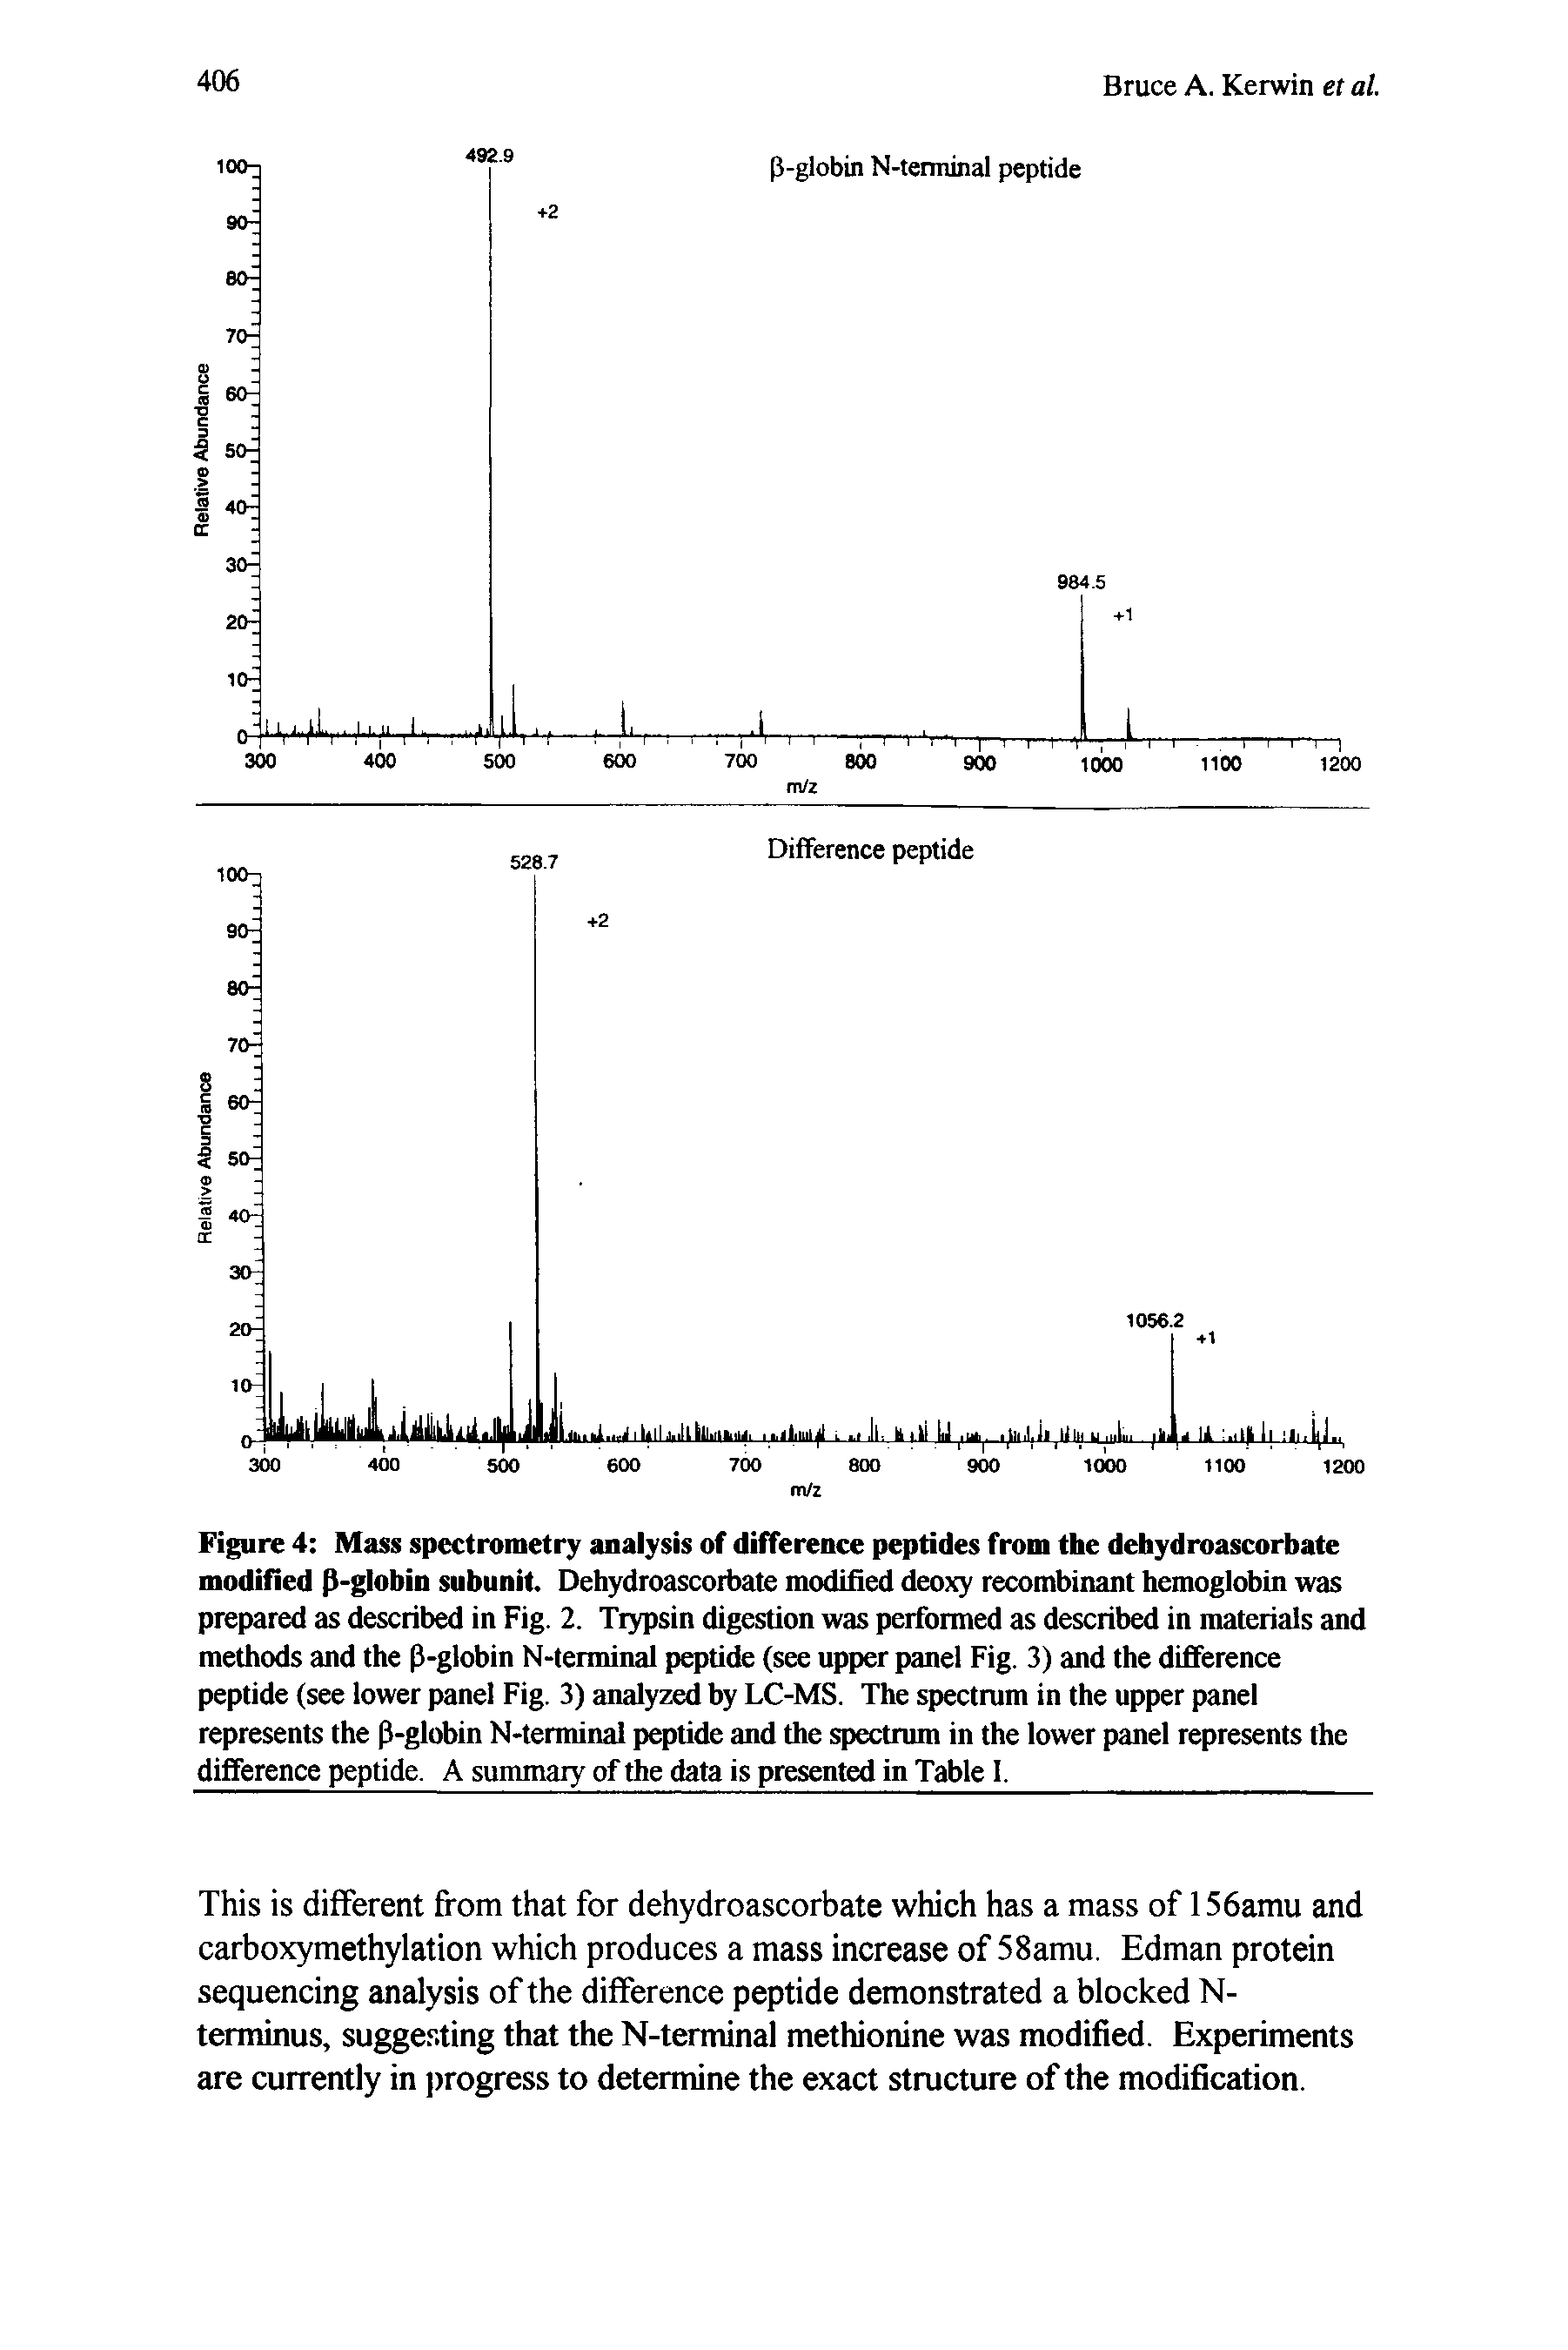 Figure 4 Mass spectrometry analysis of difference peptides from the dehydroascorbate modified p-globin subunit. Dehydroascorbate modified deoxy recombinant hemoglobin was prepared as described in Fig. 2. Trypsin digestion was performed as described in materials and methods and the p-globin N-terminal peptide (see upper panel Fig. 3) and the difference peptide (see lower panel Fig. 3) analyzed hy LC-MS. The spectrum in the upper panel represents the P-globin N-terminal peptide and the spectrum in the lower panel represents the difference peptide. A summary of the data is presented in Table 1.